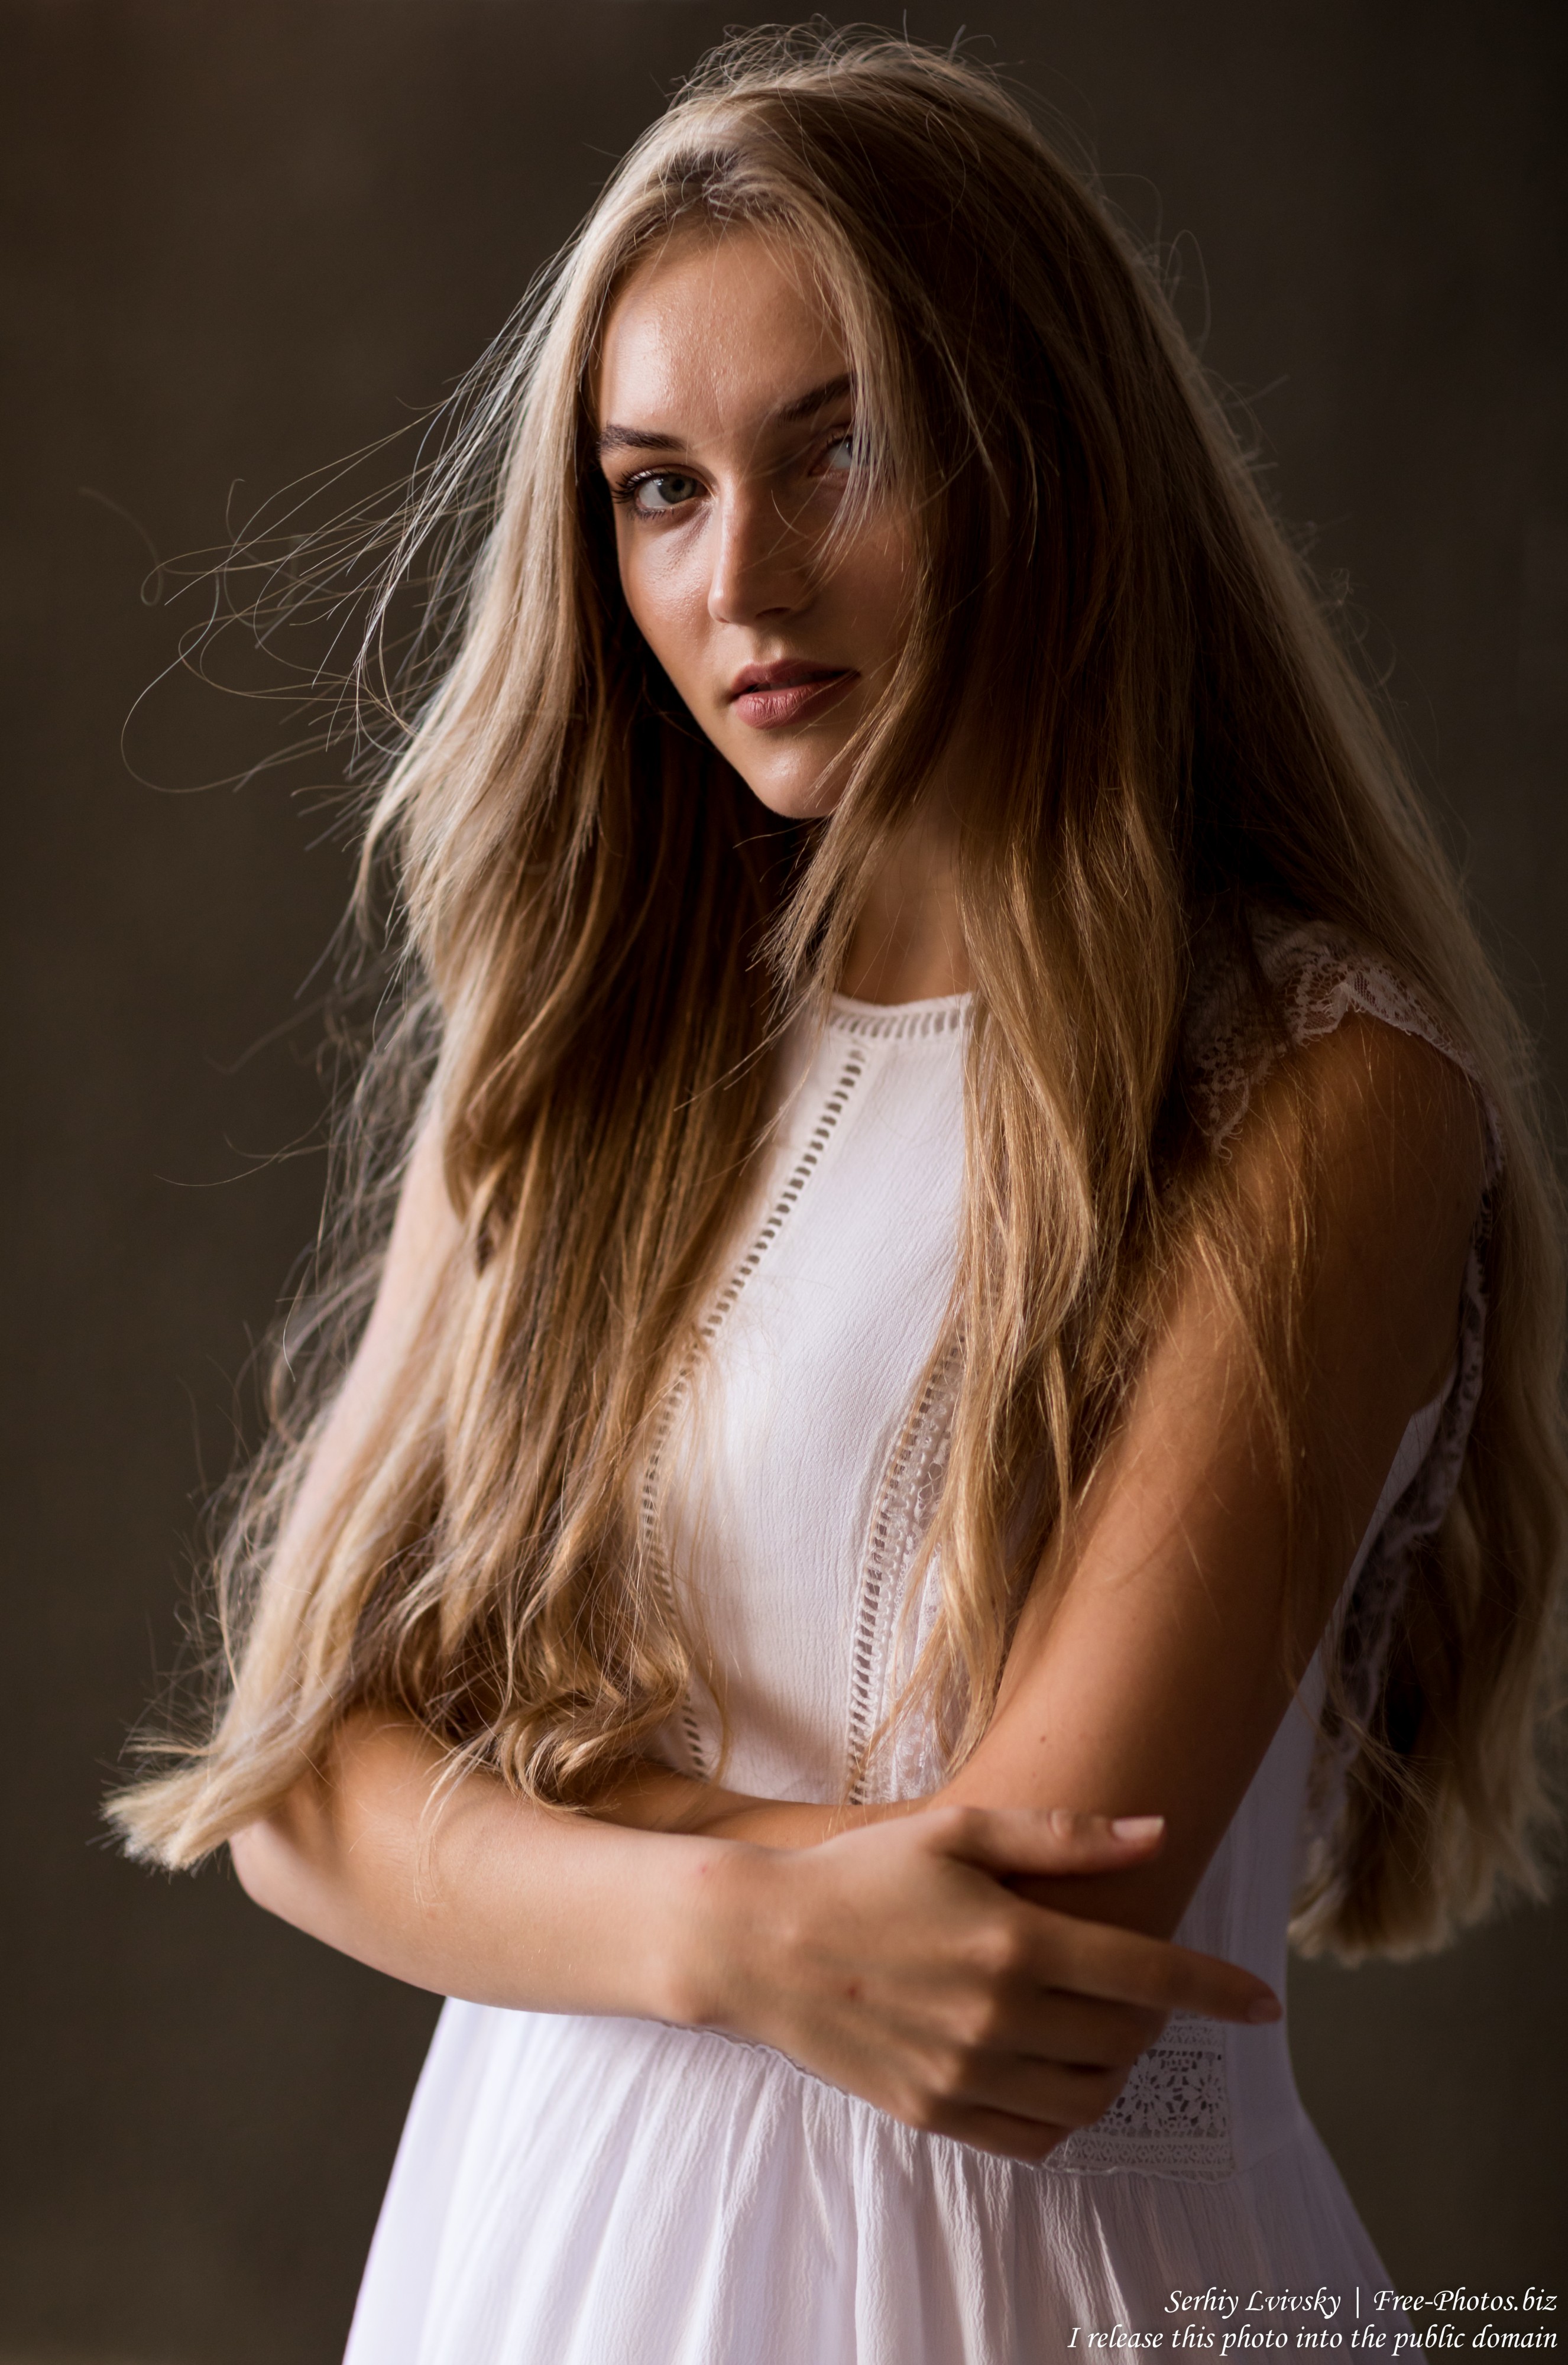 Yaryna - a 21-year-old natural blonde Catholic girl photographed in August 2019 by Serhiy Lvivsky, picture 17